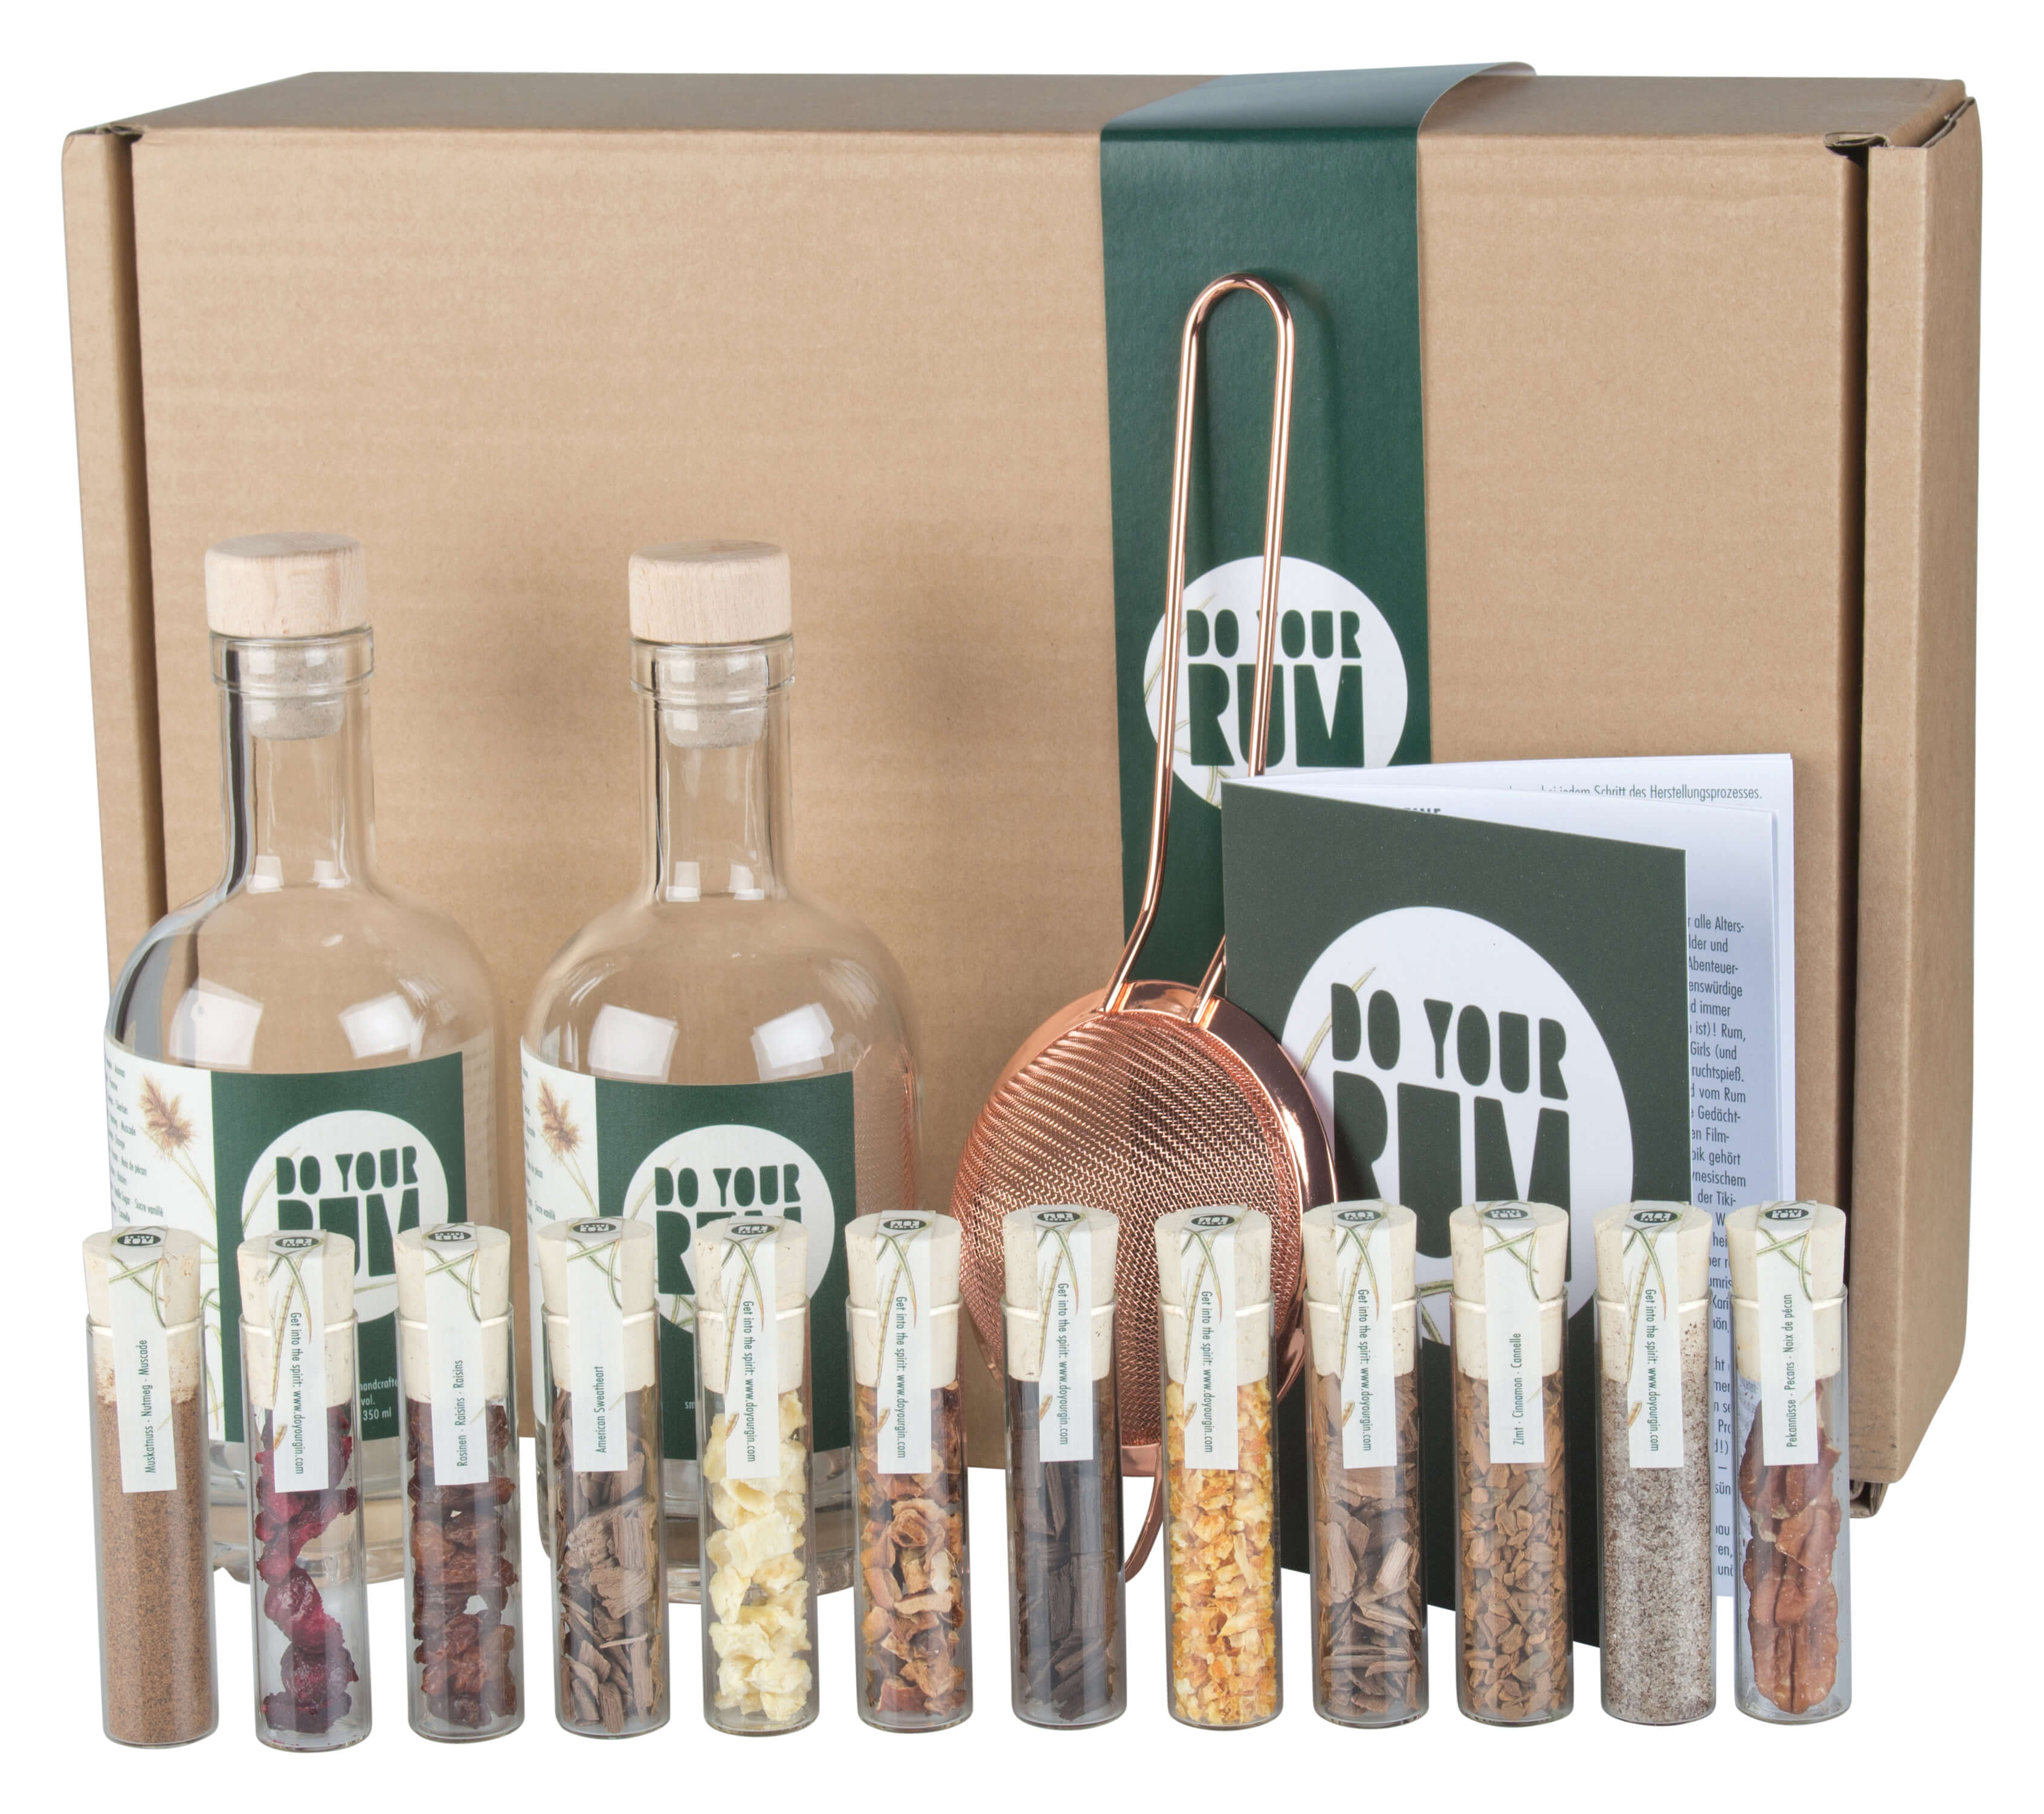 DO YOUR RUM Rum Making Kit Diy Adult Gift Kits Cool Fathers Day Gift  Bartender Gift Basket Gift for Men & Women 12 Botanicals -  Singapore